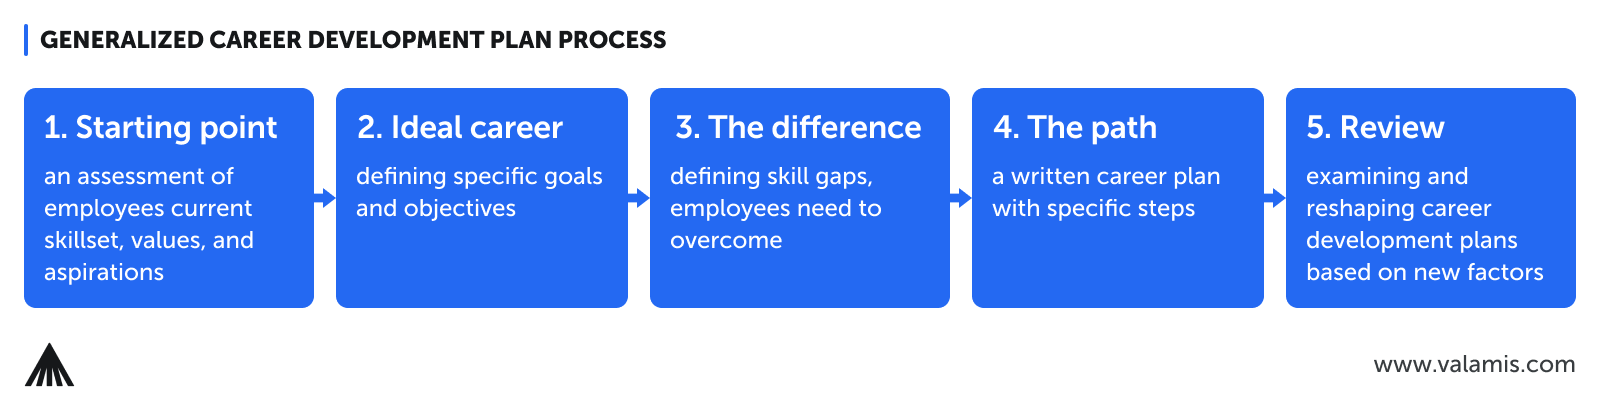 The image represents the generalized career development plan process